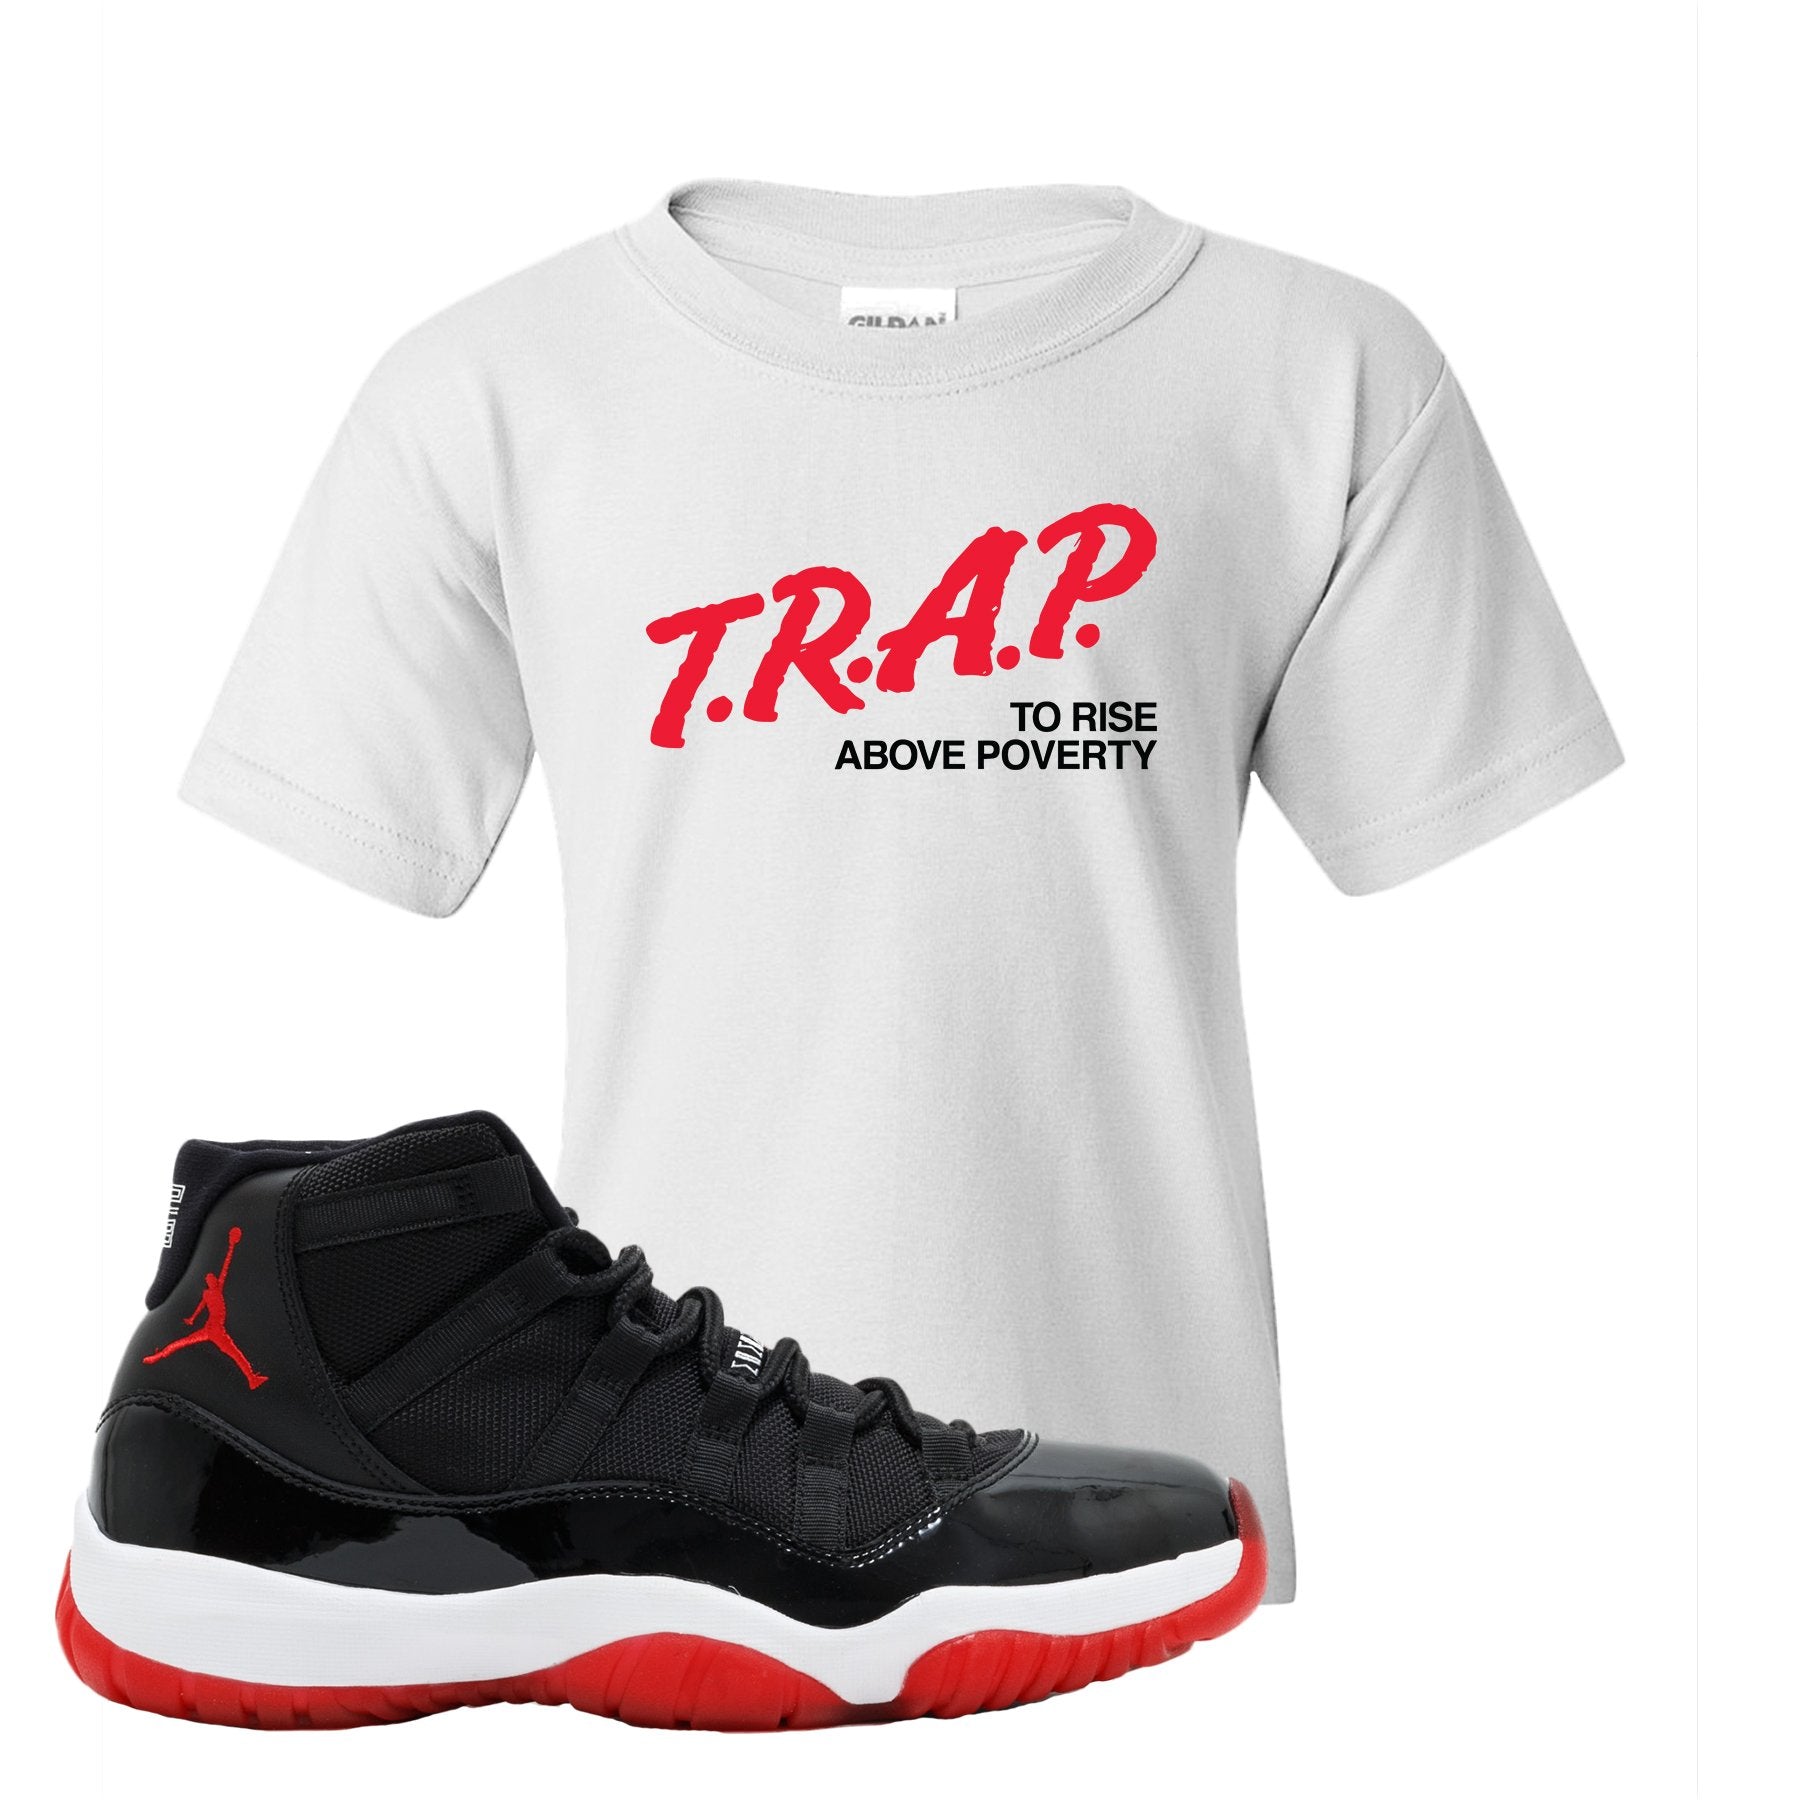 Jordan 11 Bred Trap To Rise Above Poverty White Sneaker Hook Up Kid's T-Shirt